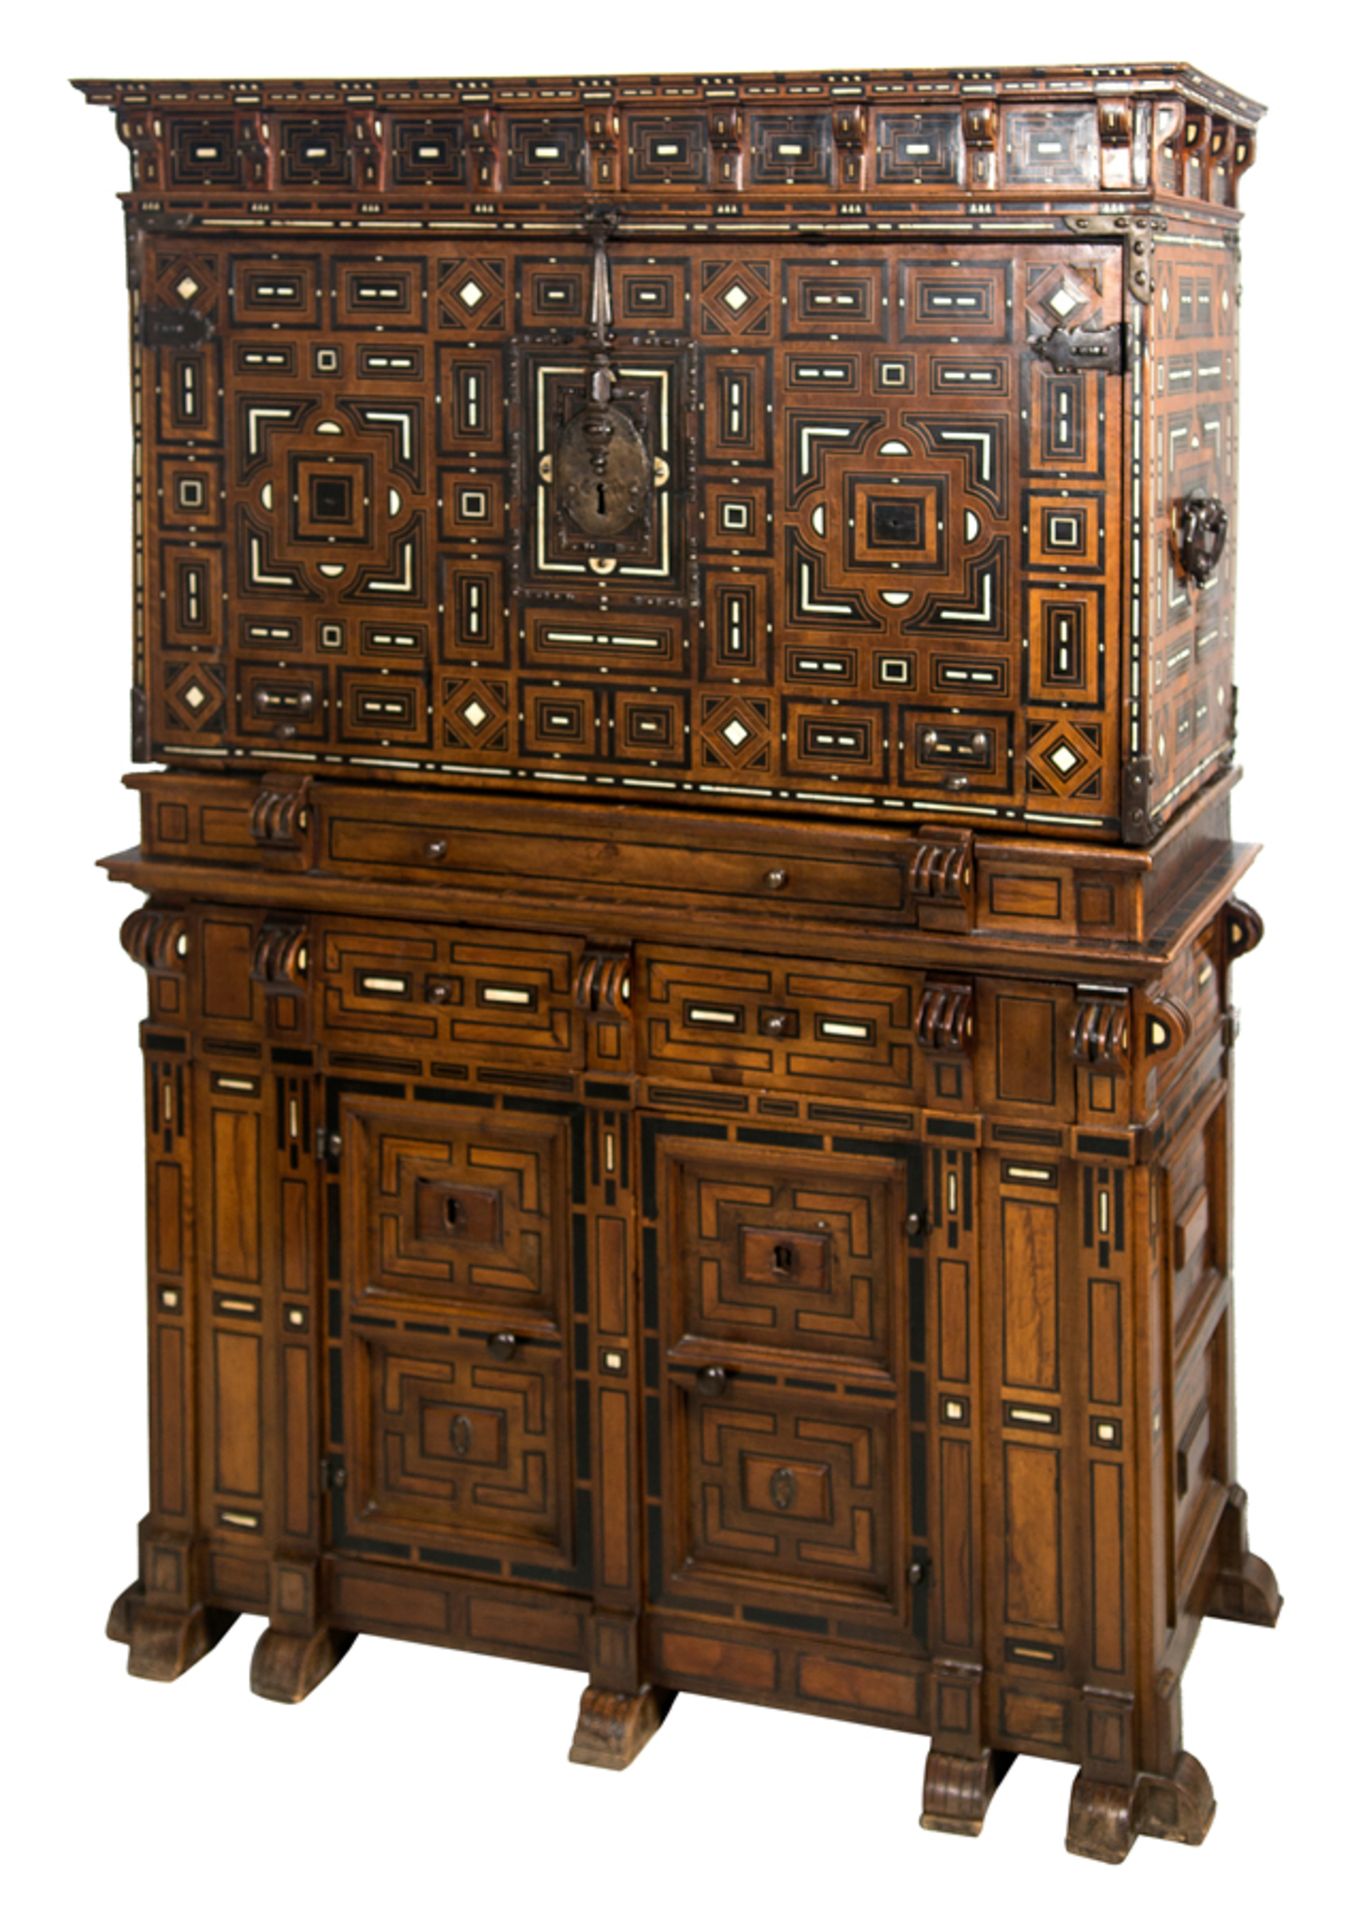 Important chest of drawers with inlaid walnut,ebony,bone and gilded hardware.Salamanca ... 16th cent